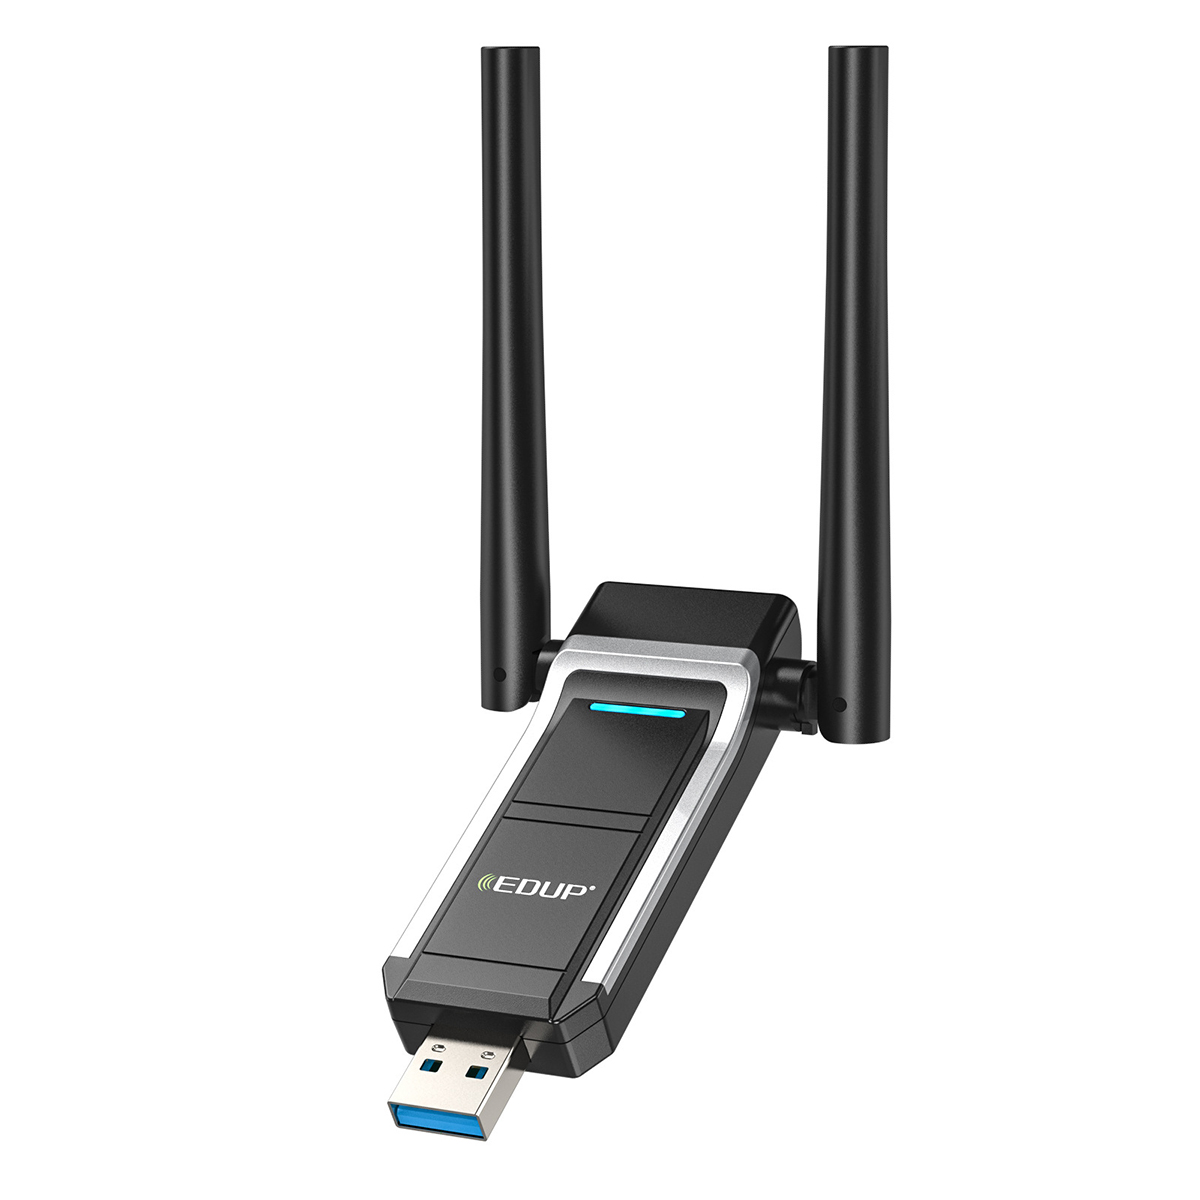 EDUP-1300Mbps-USB-Wireless-WiFi-Adapter-2458G-Dual-Band-Network-Card-WiFi-Receiver-EP-AC1698-1912920-1